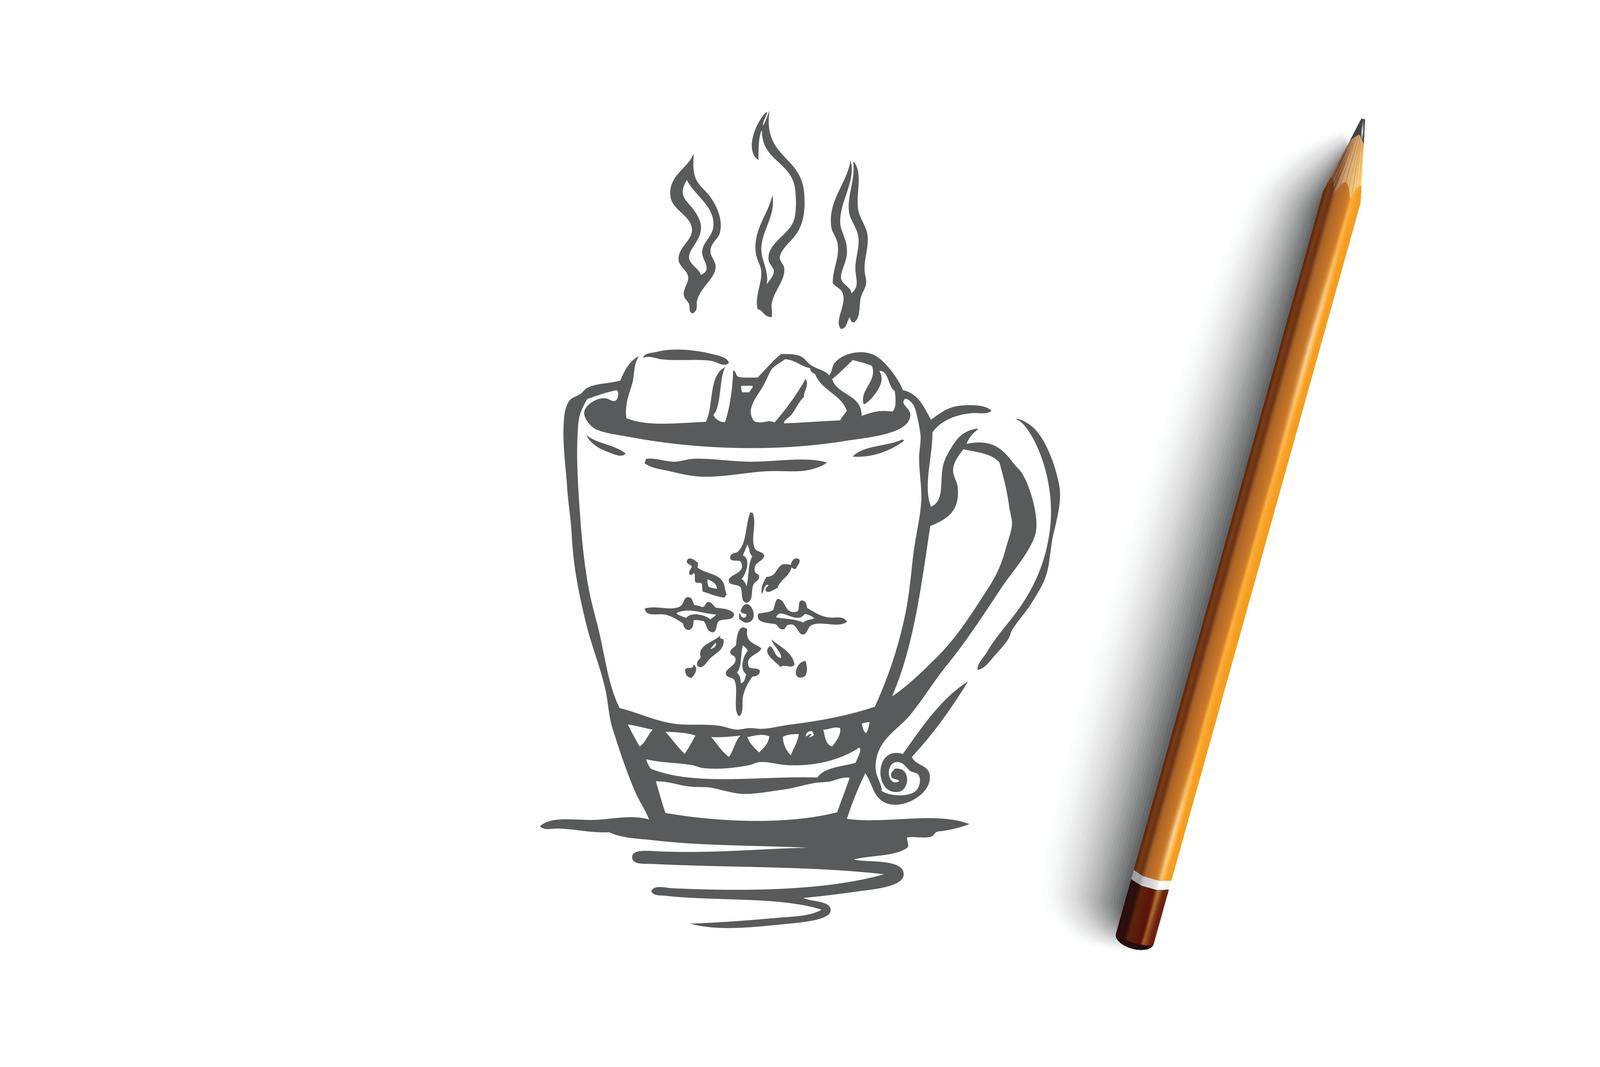 New year, cup, holiday, mug, drink concept. Hand drawn mug with hot drink concept sketch. Isolated vector illustration.